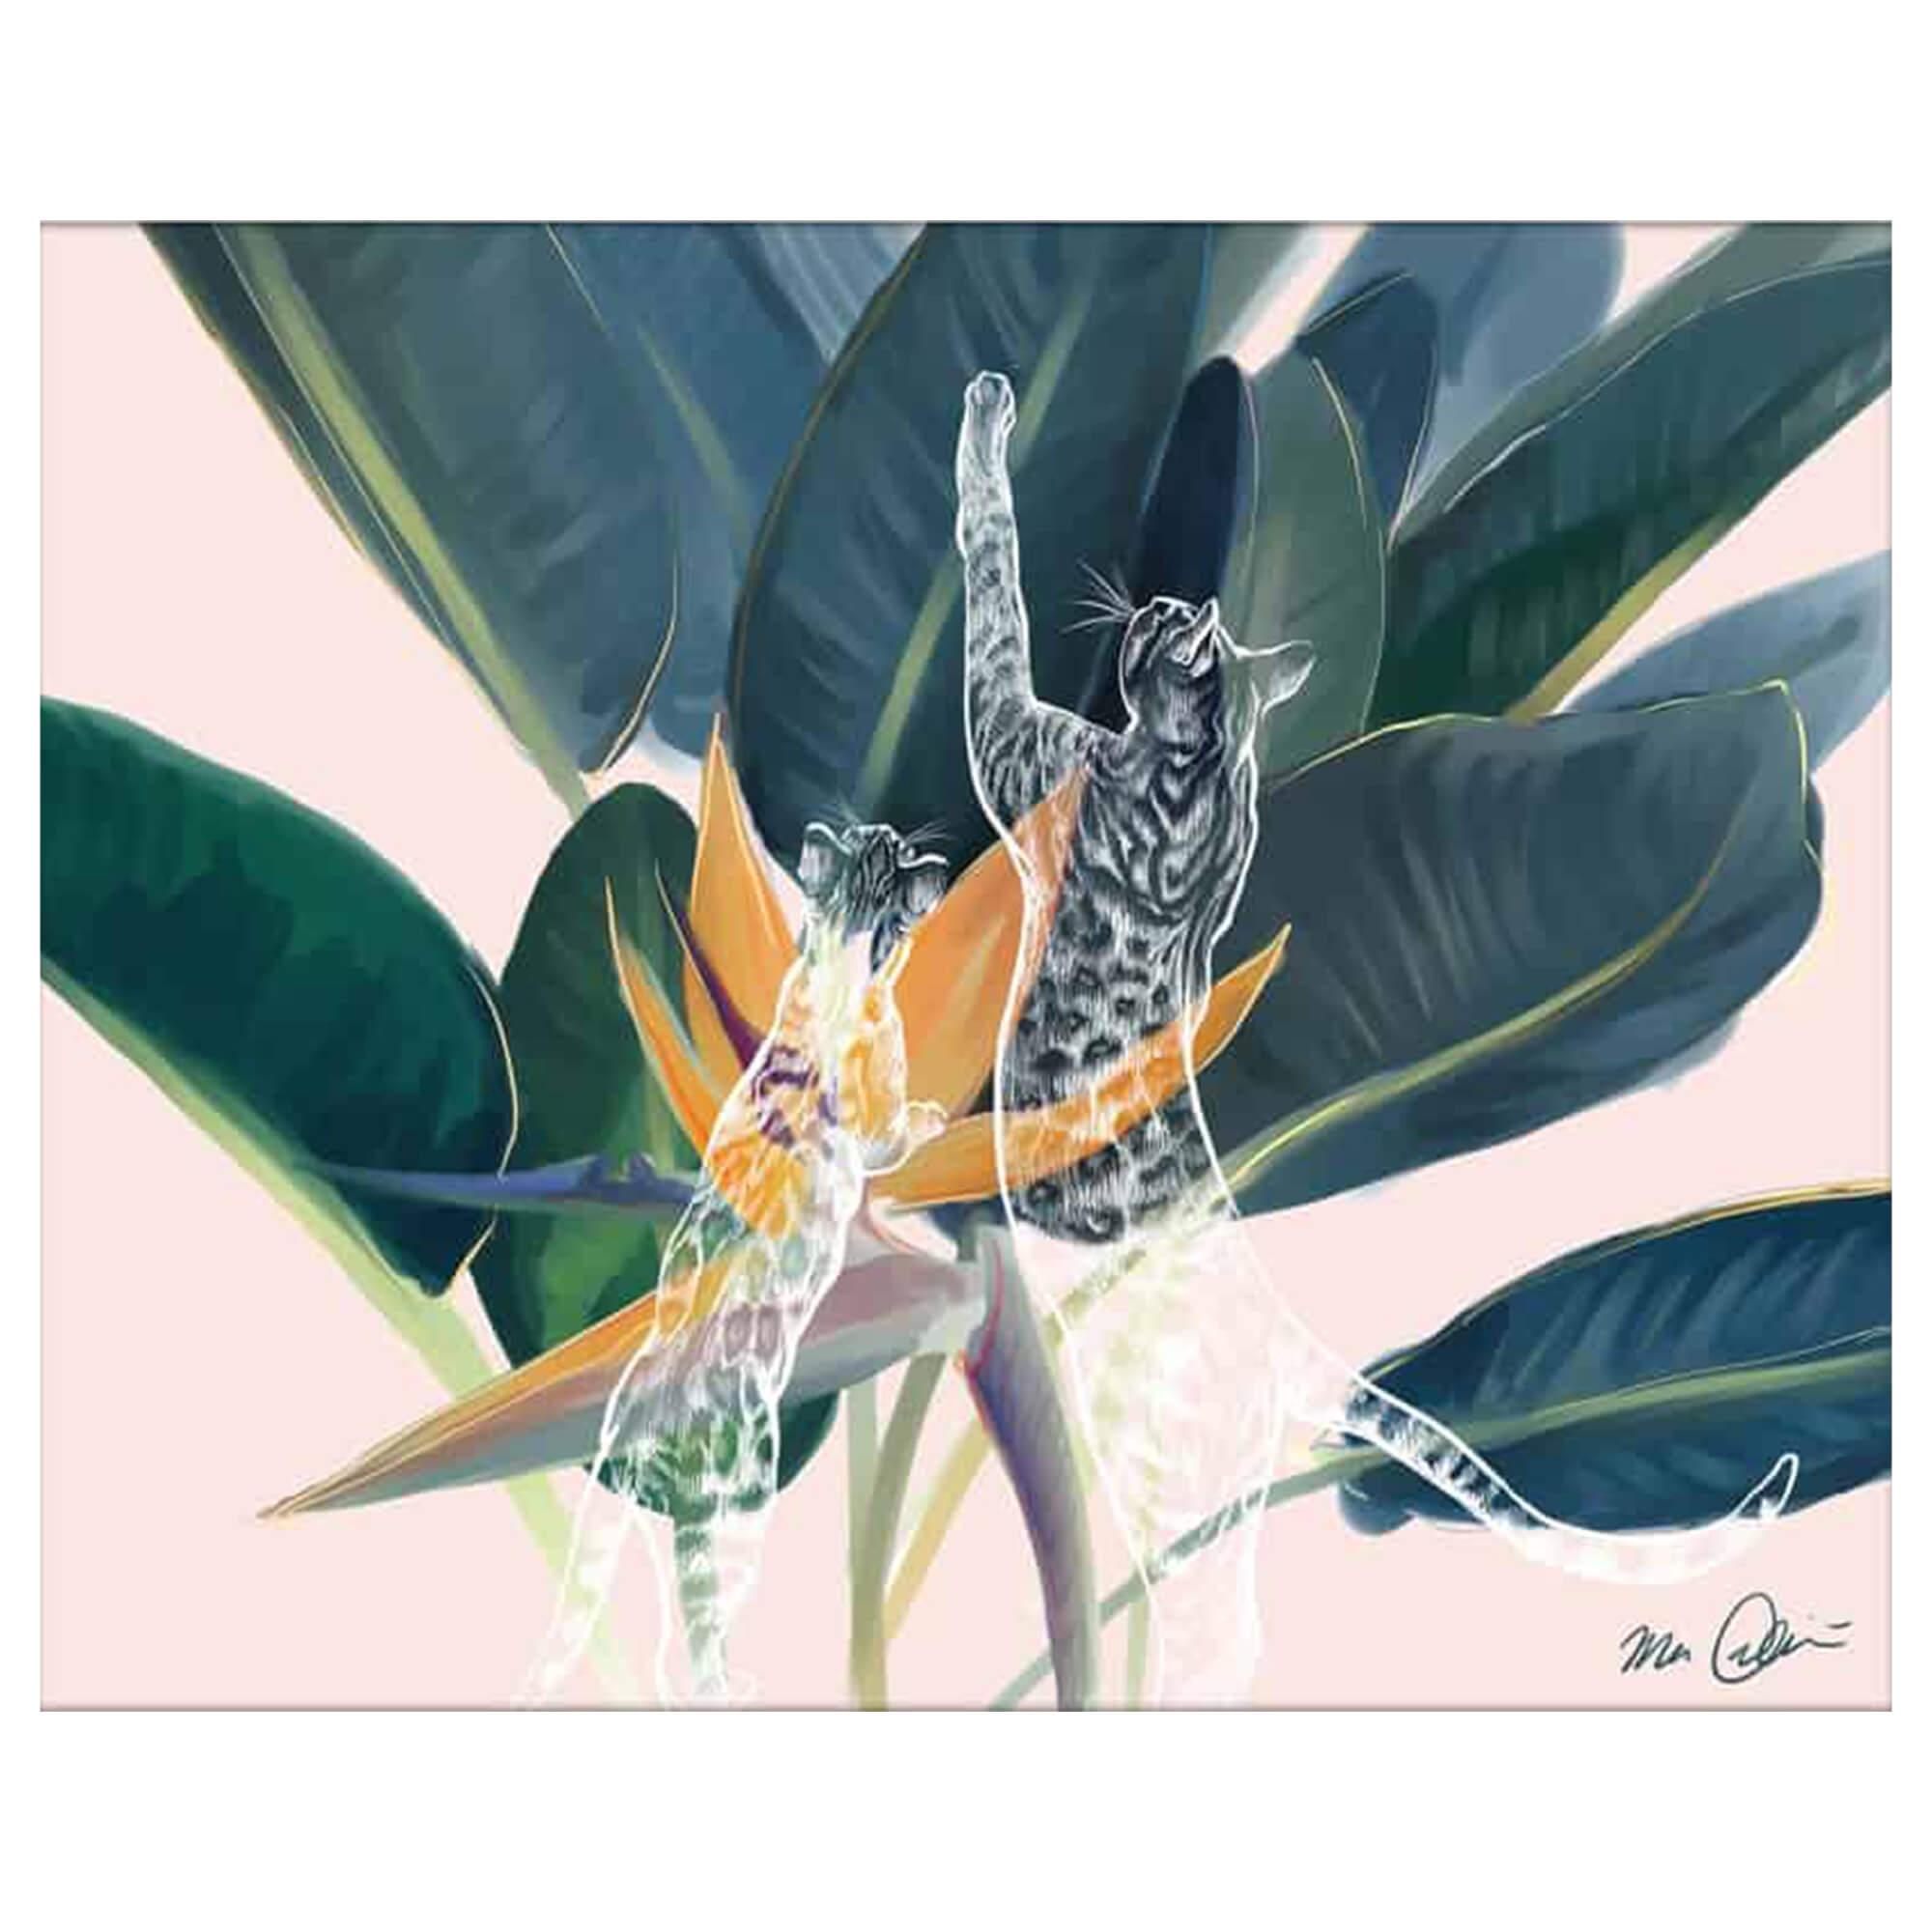 Matted art print of two plant cats climbing on tropical fronds by Hawaii artist Mae Waite